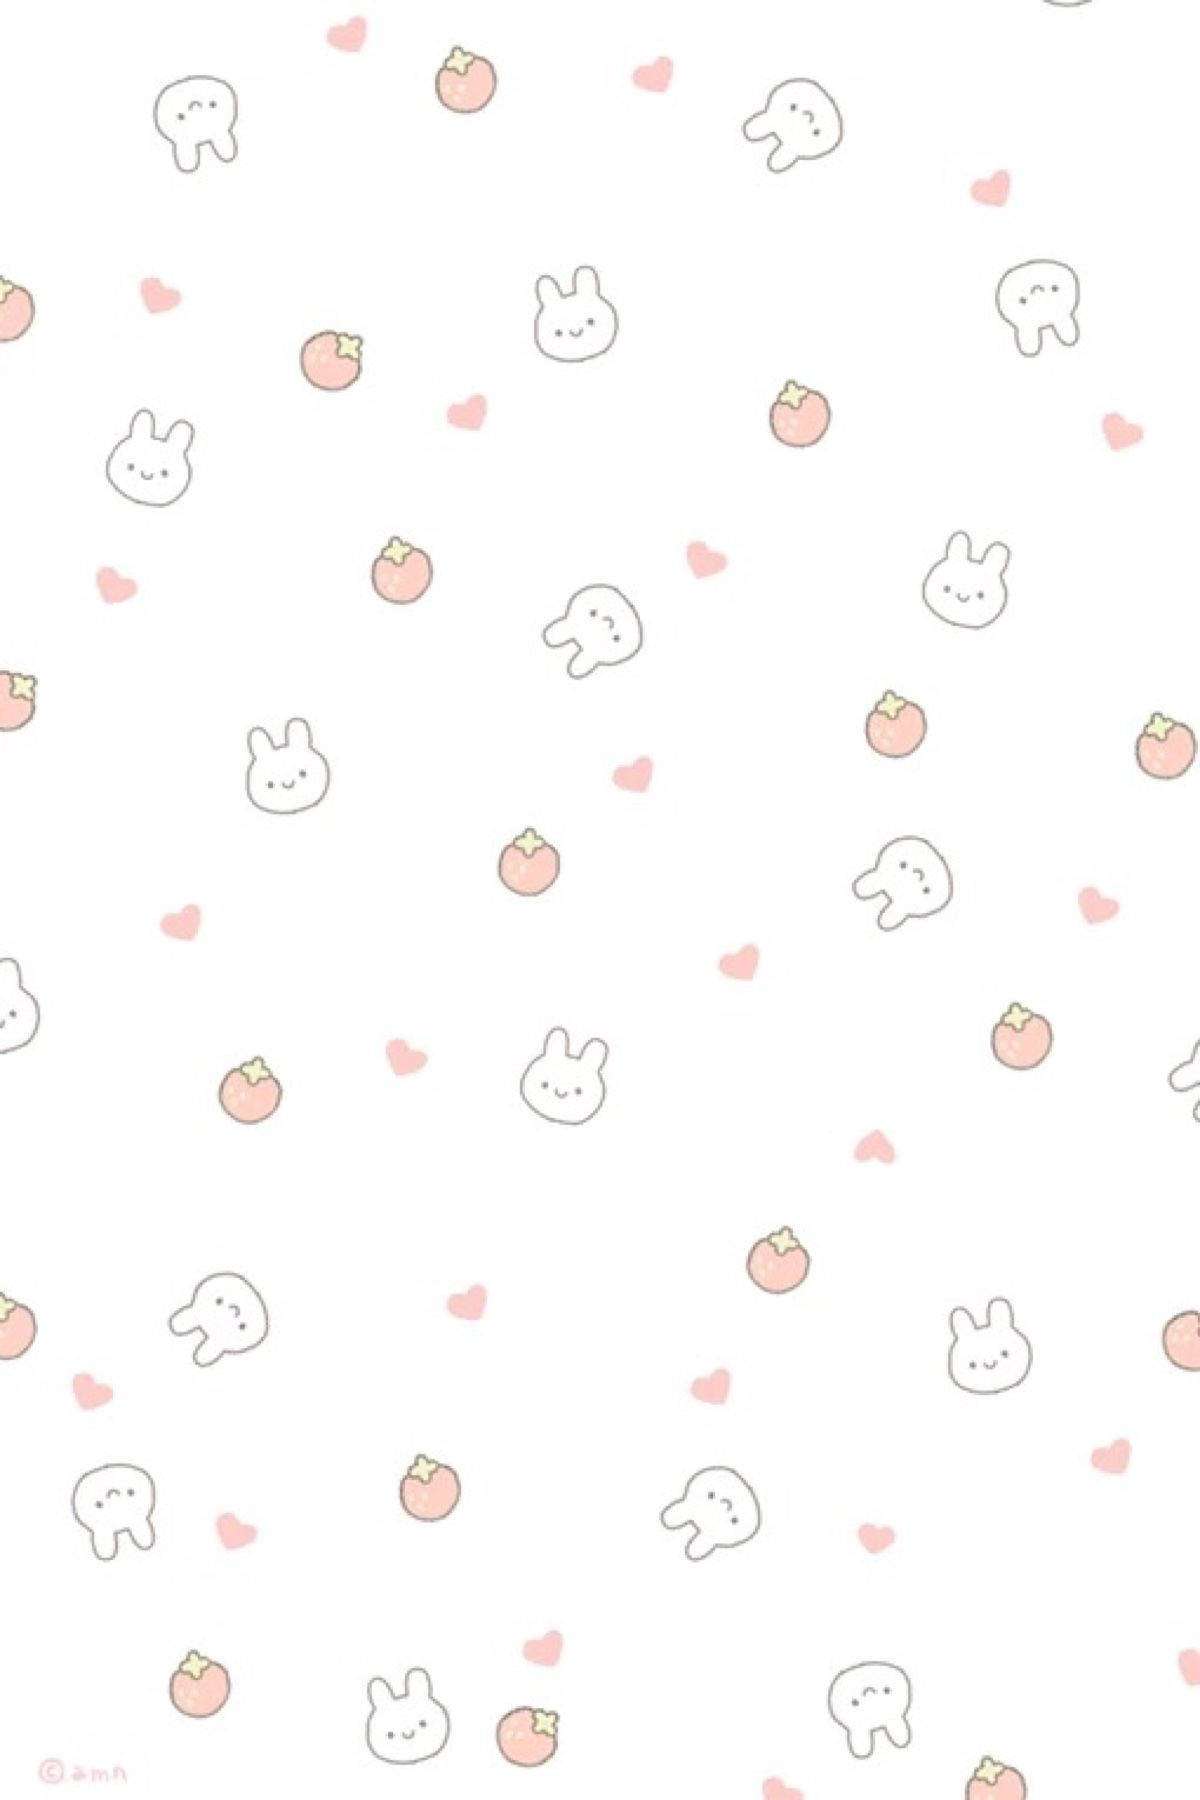 Cute 1200X1800 Wallpaper and Background Image